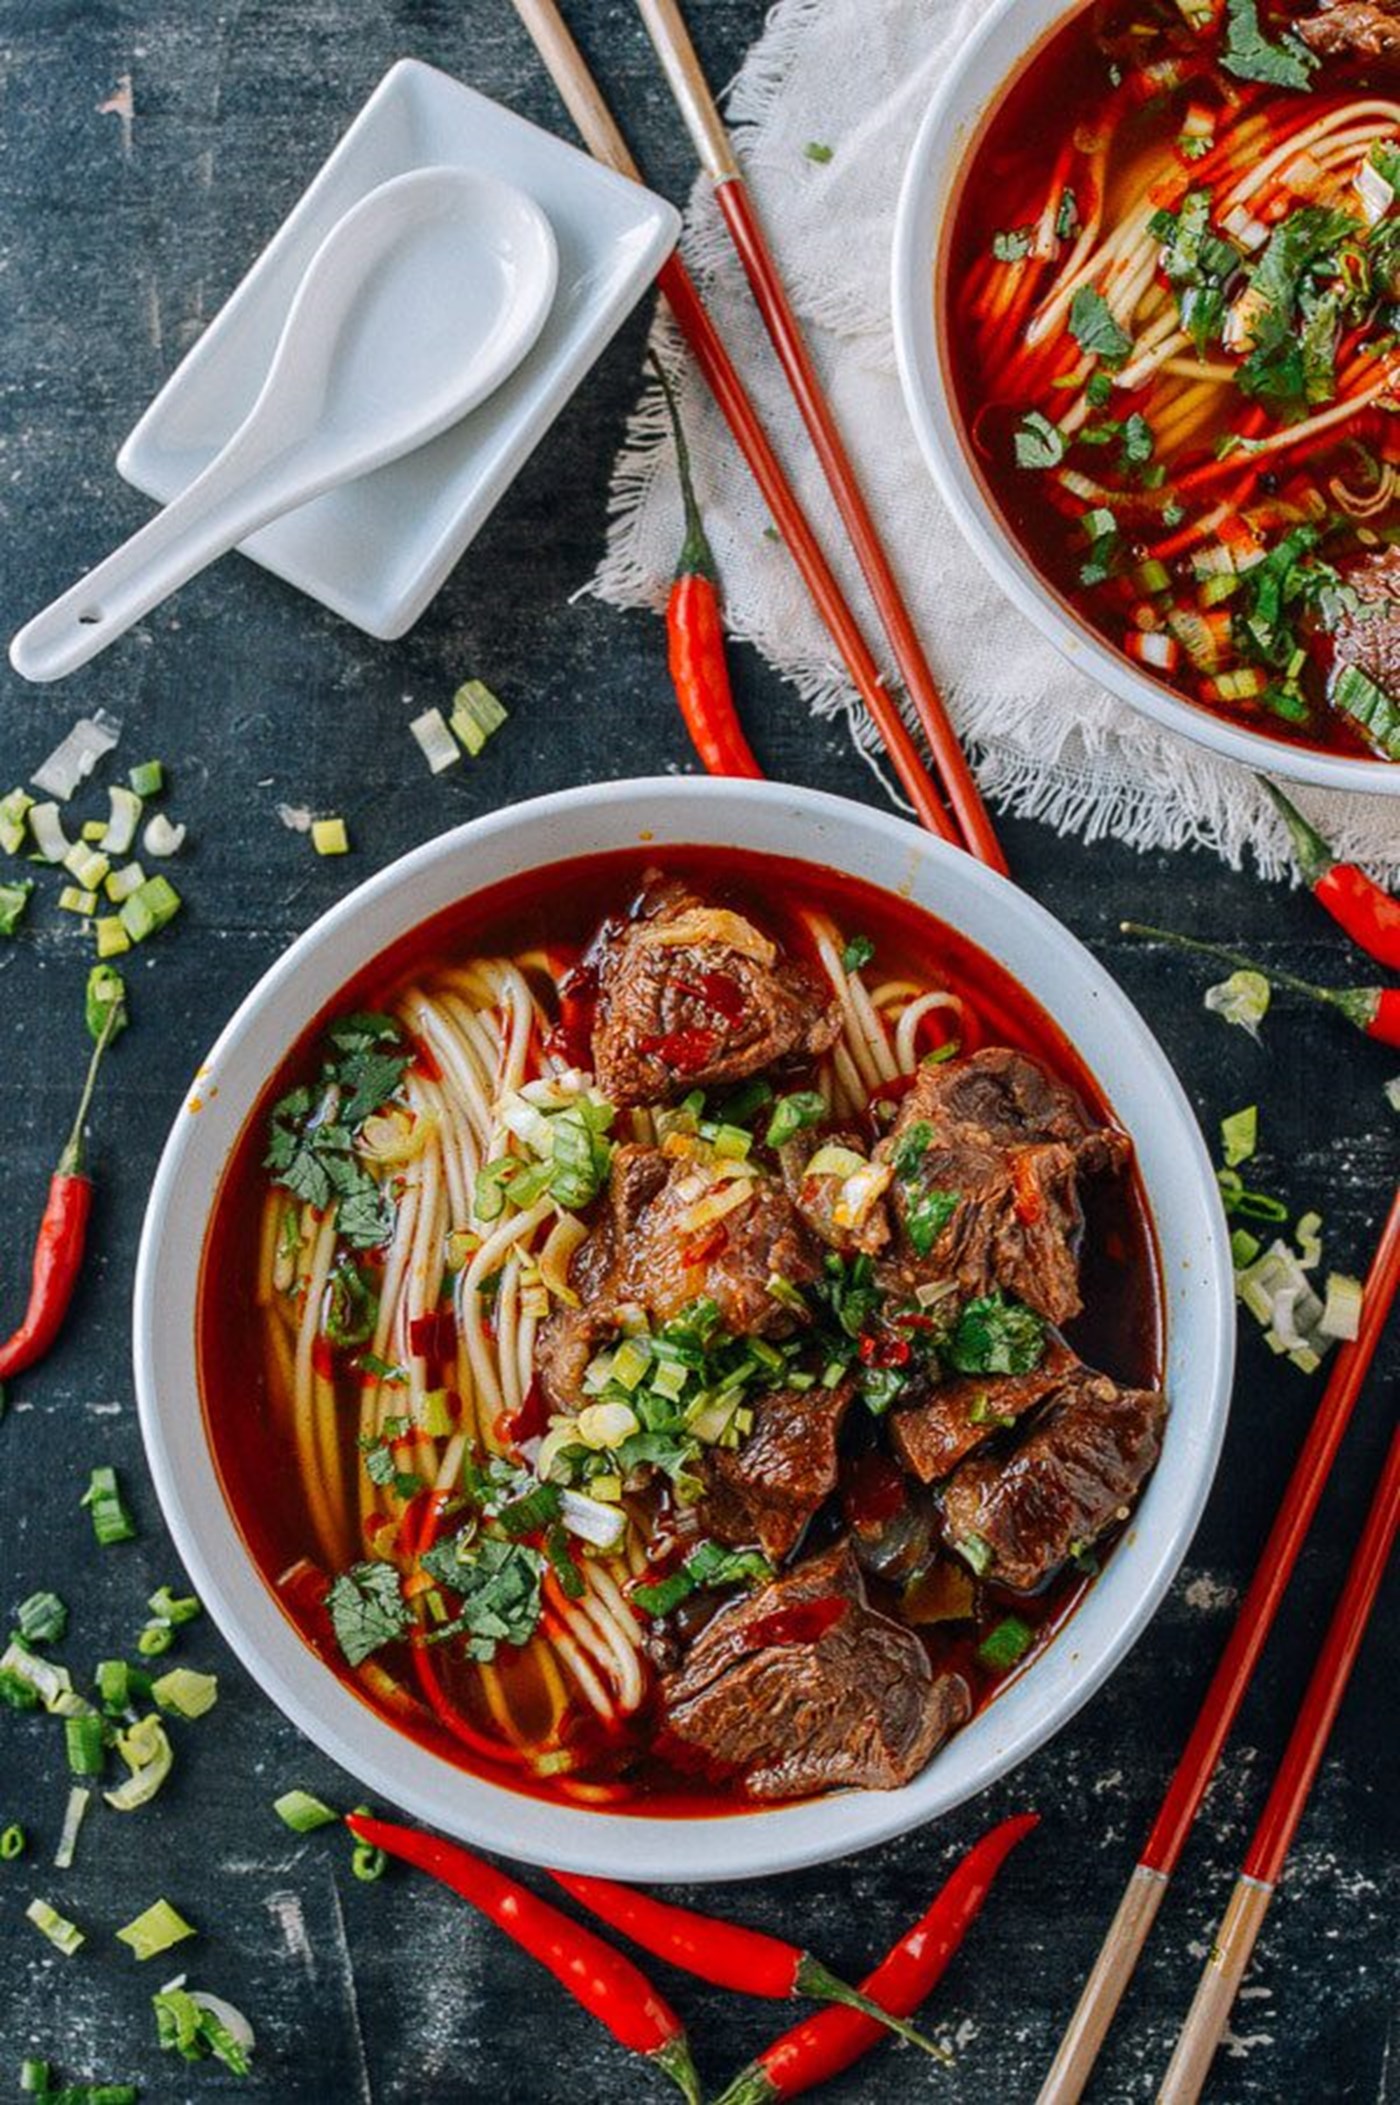 Spicy Beef Noodle Soup (Credit: The Woks Of Life)